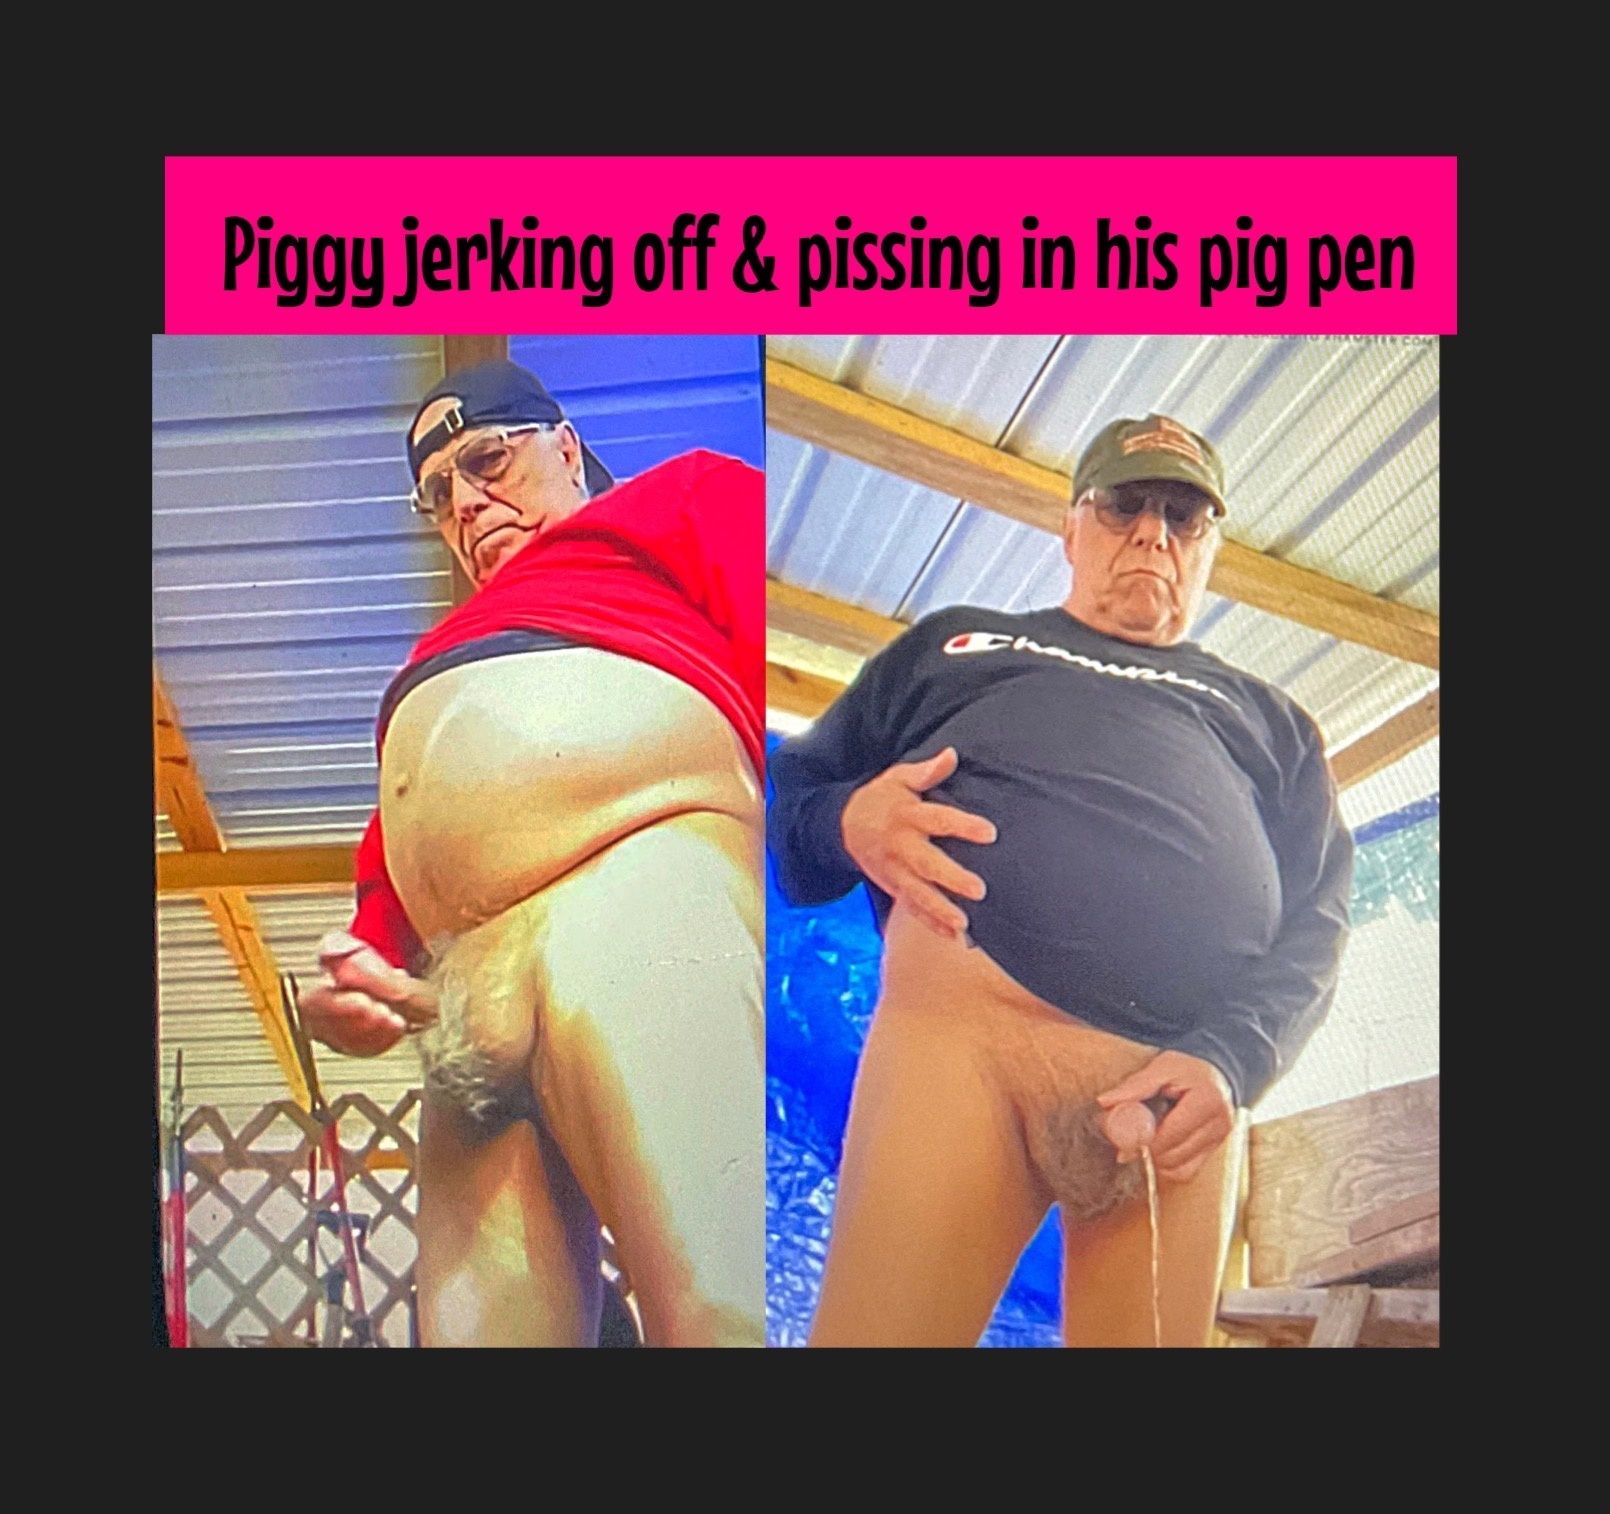 The pig jerking and pissing